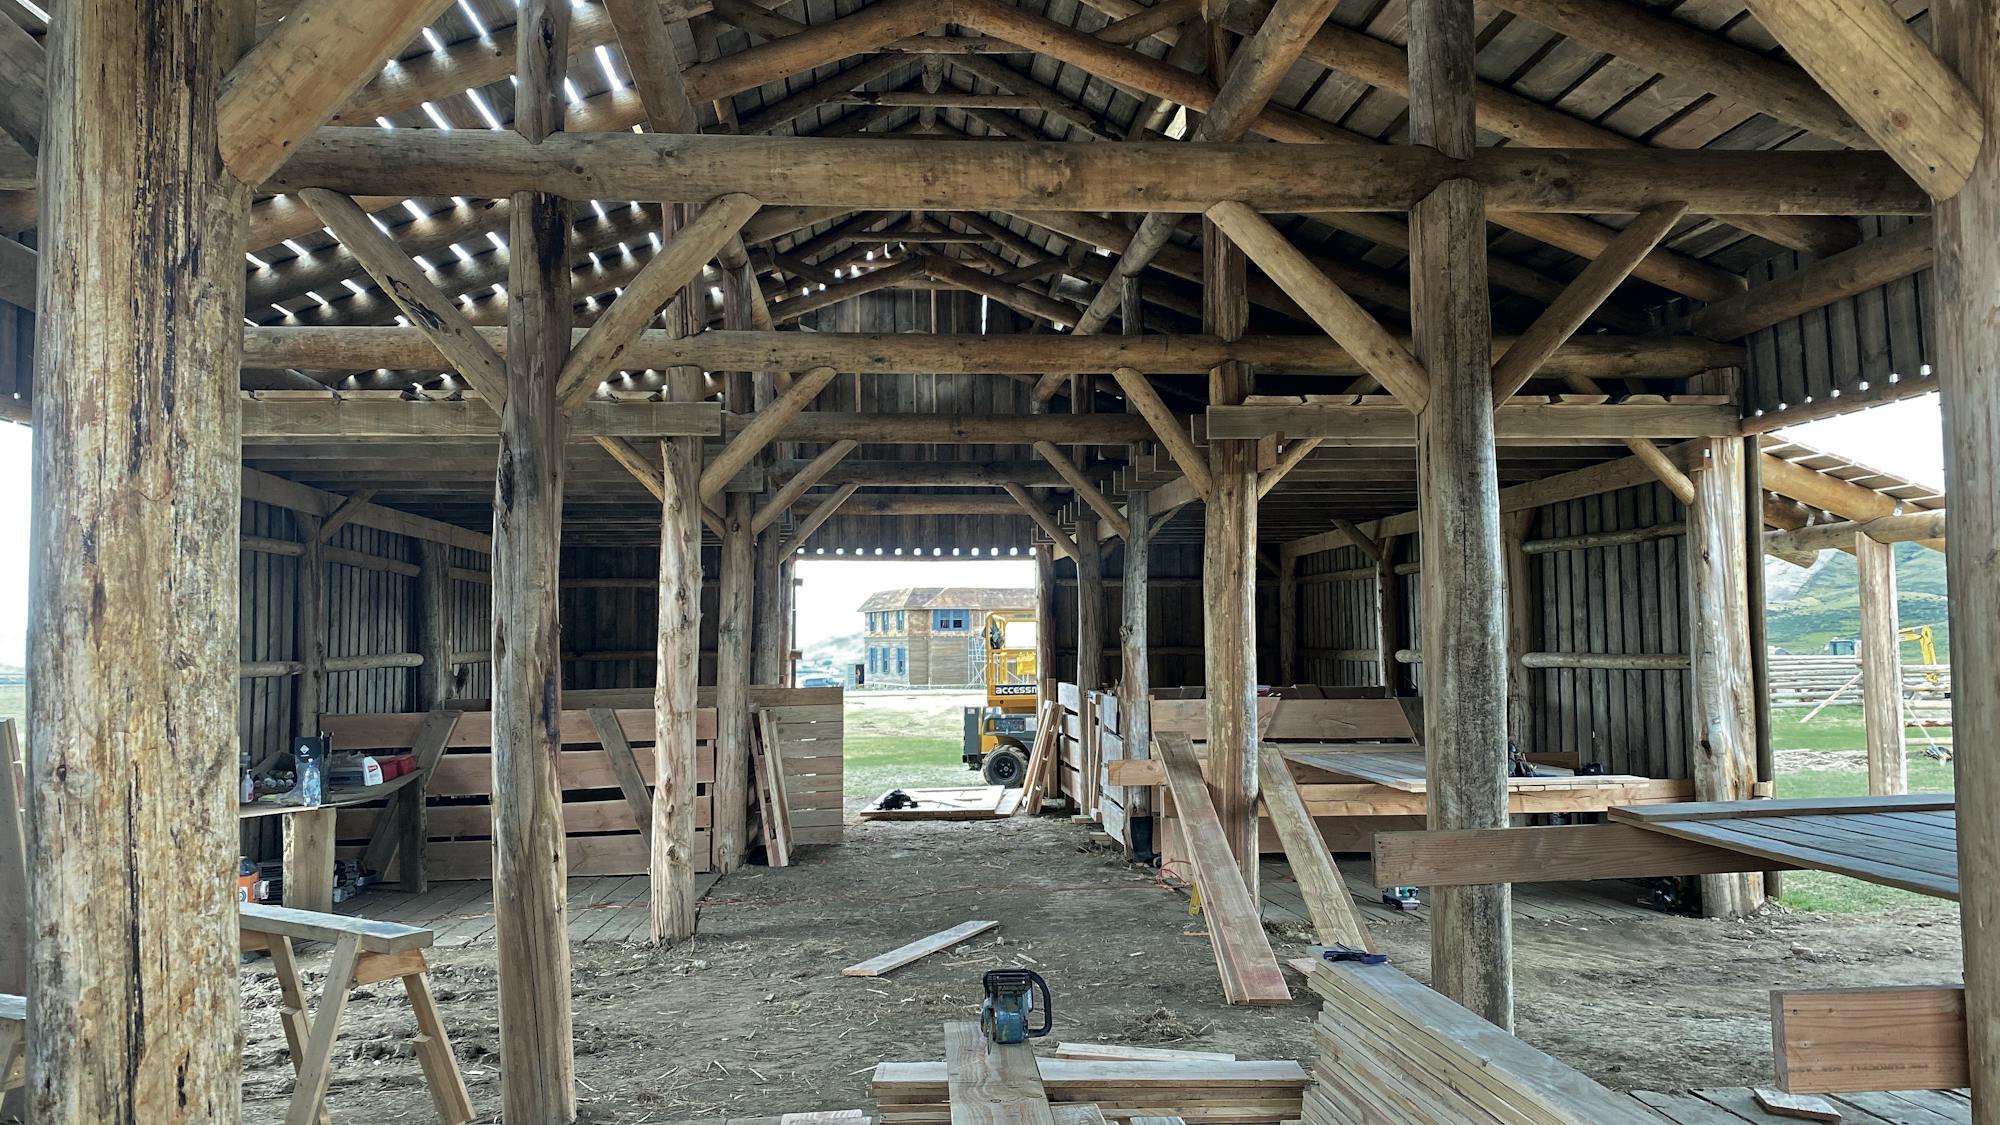 Inside the early stages of building the ranch. The bare bones structure is missing walls and there are tools and boards scattered about the room.